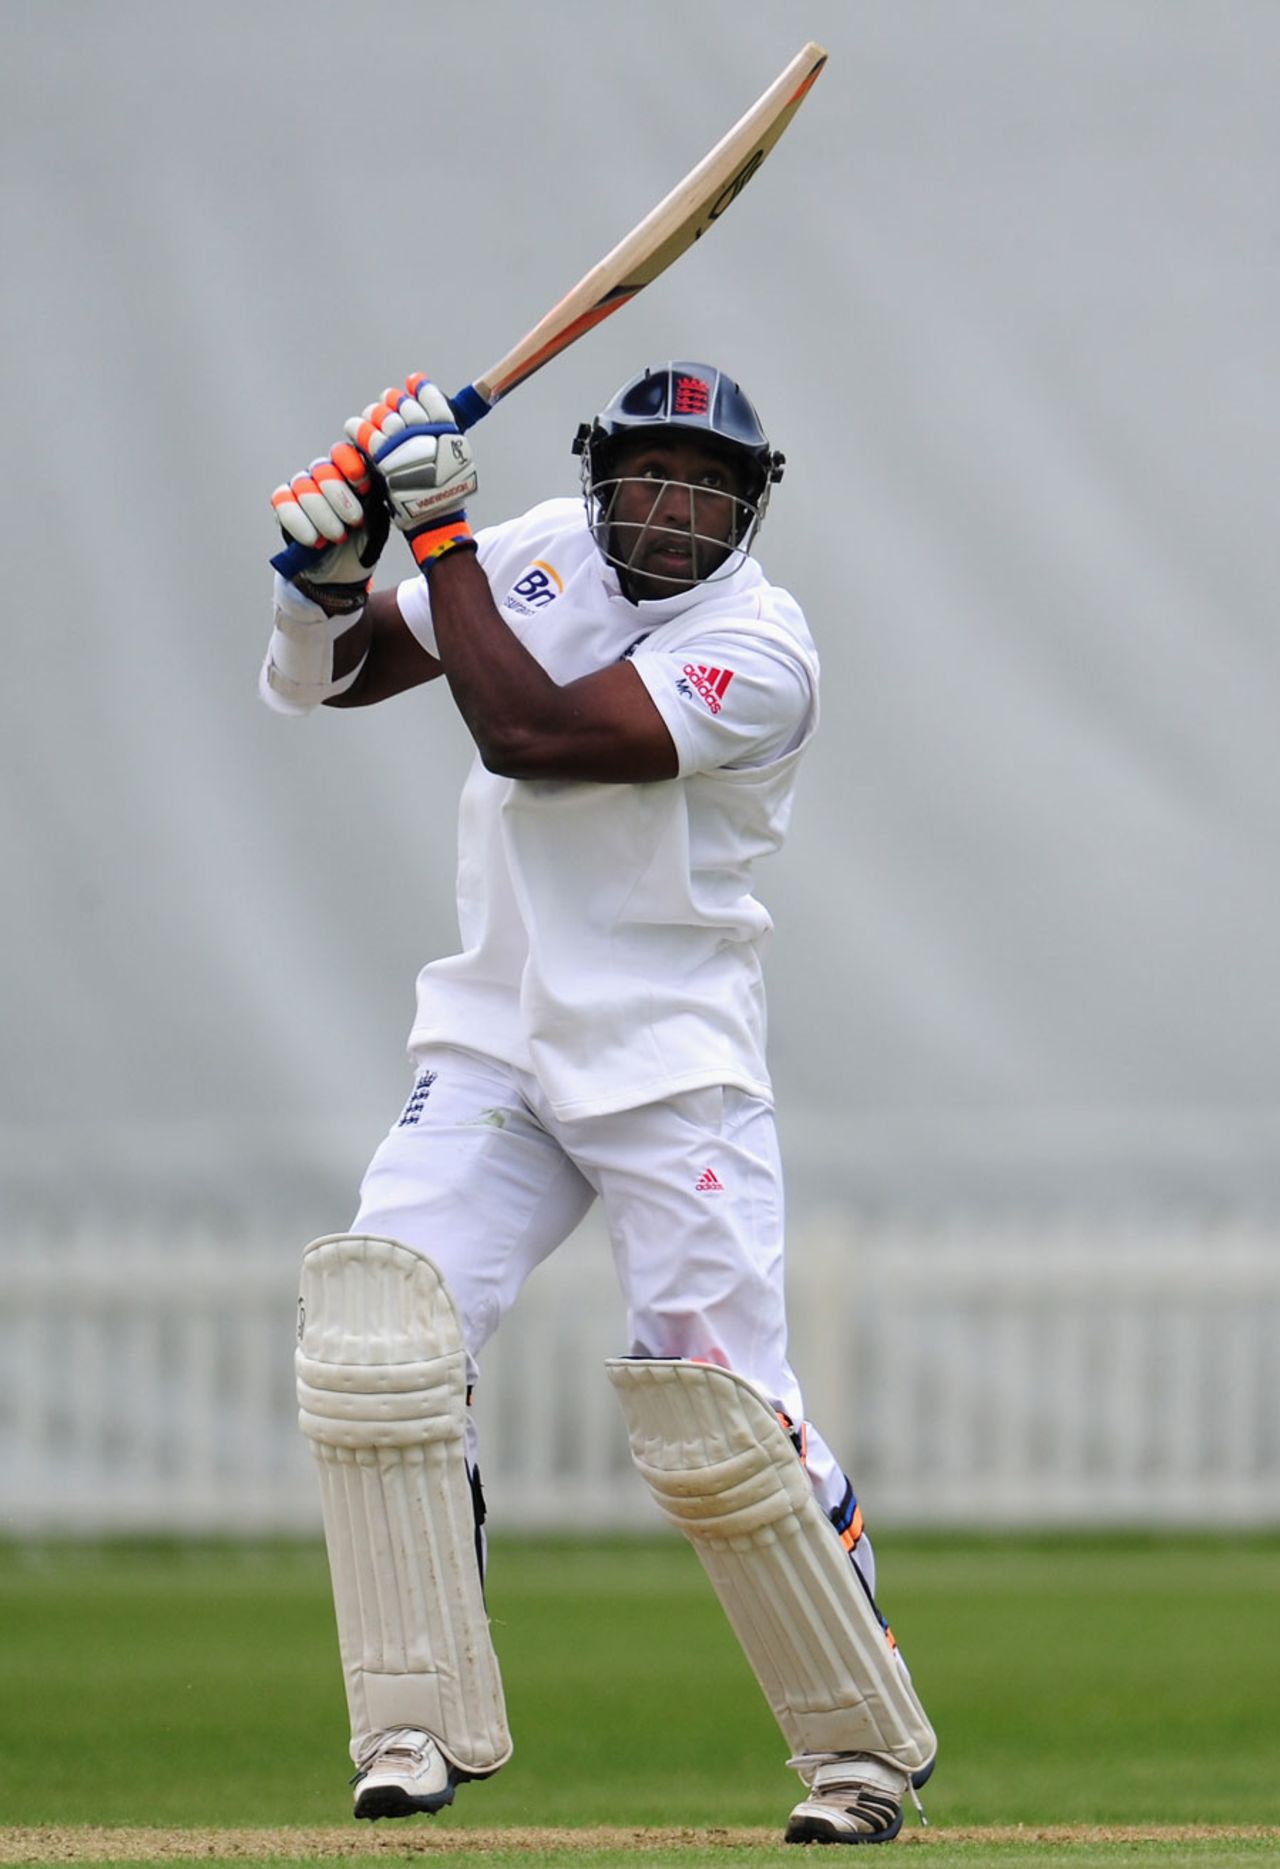 Michael Carberry struck a half-century, England Lions v New Zealanders, Tour match, Grace Road, 2nd day, May 10, 2013